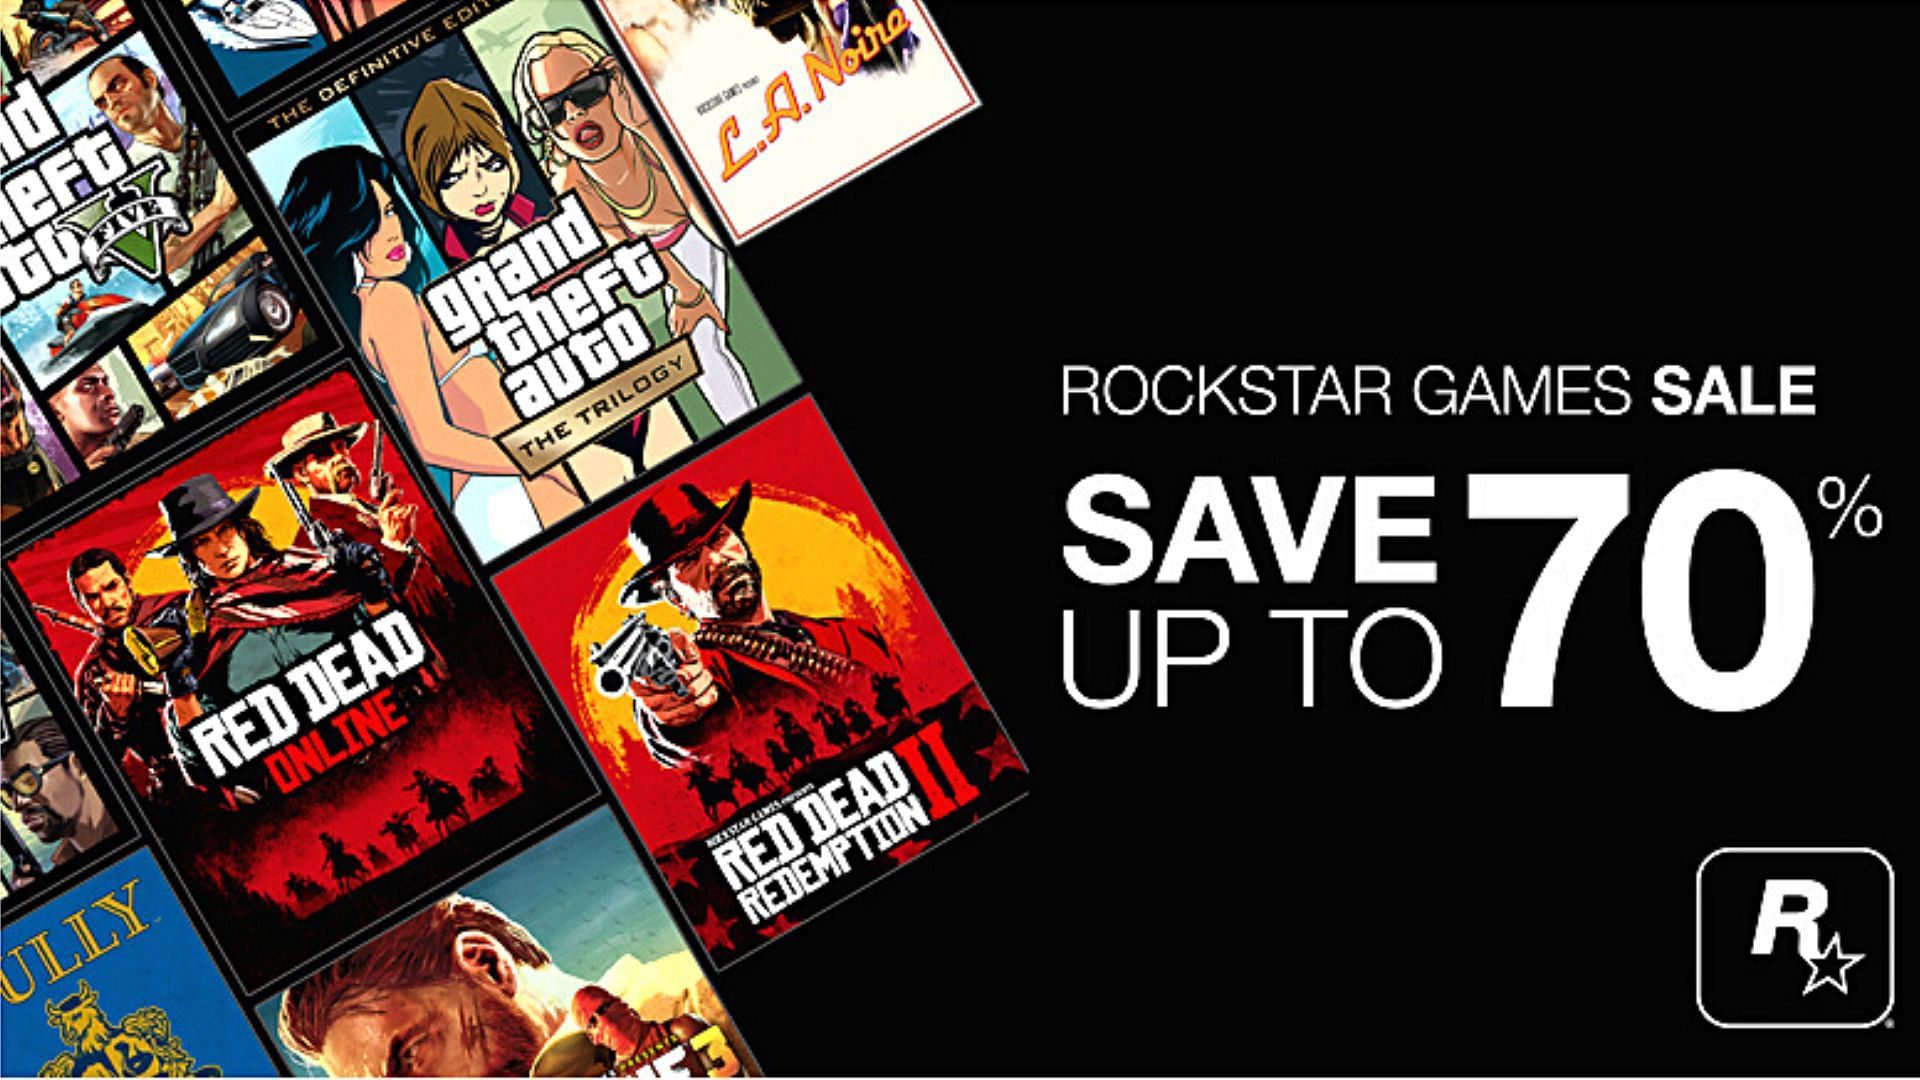 A brief about the current sale on Steam on Rockstar Games